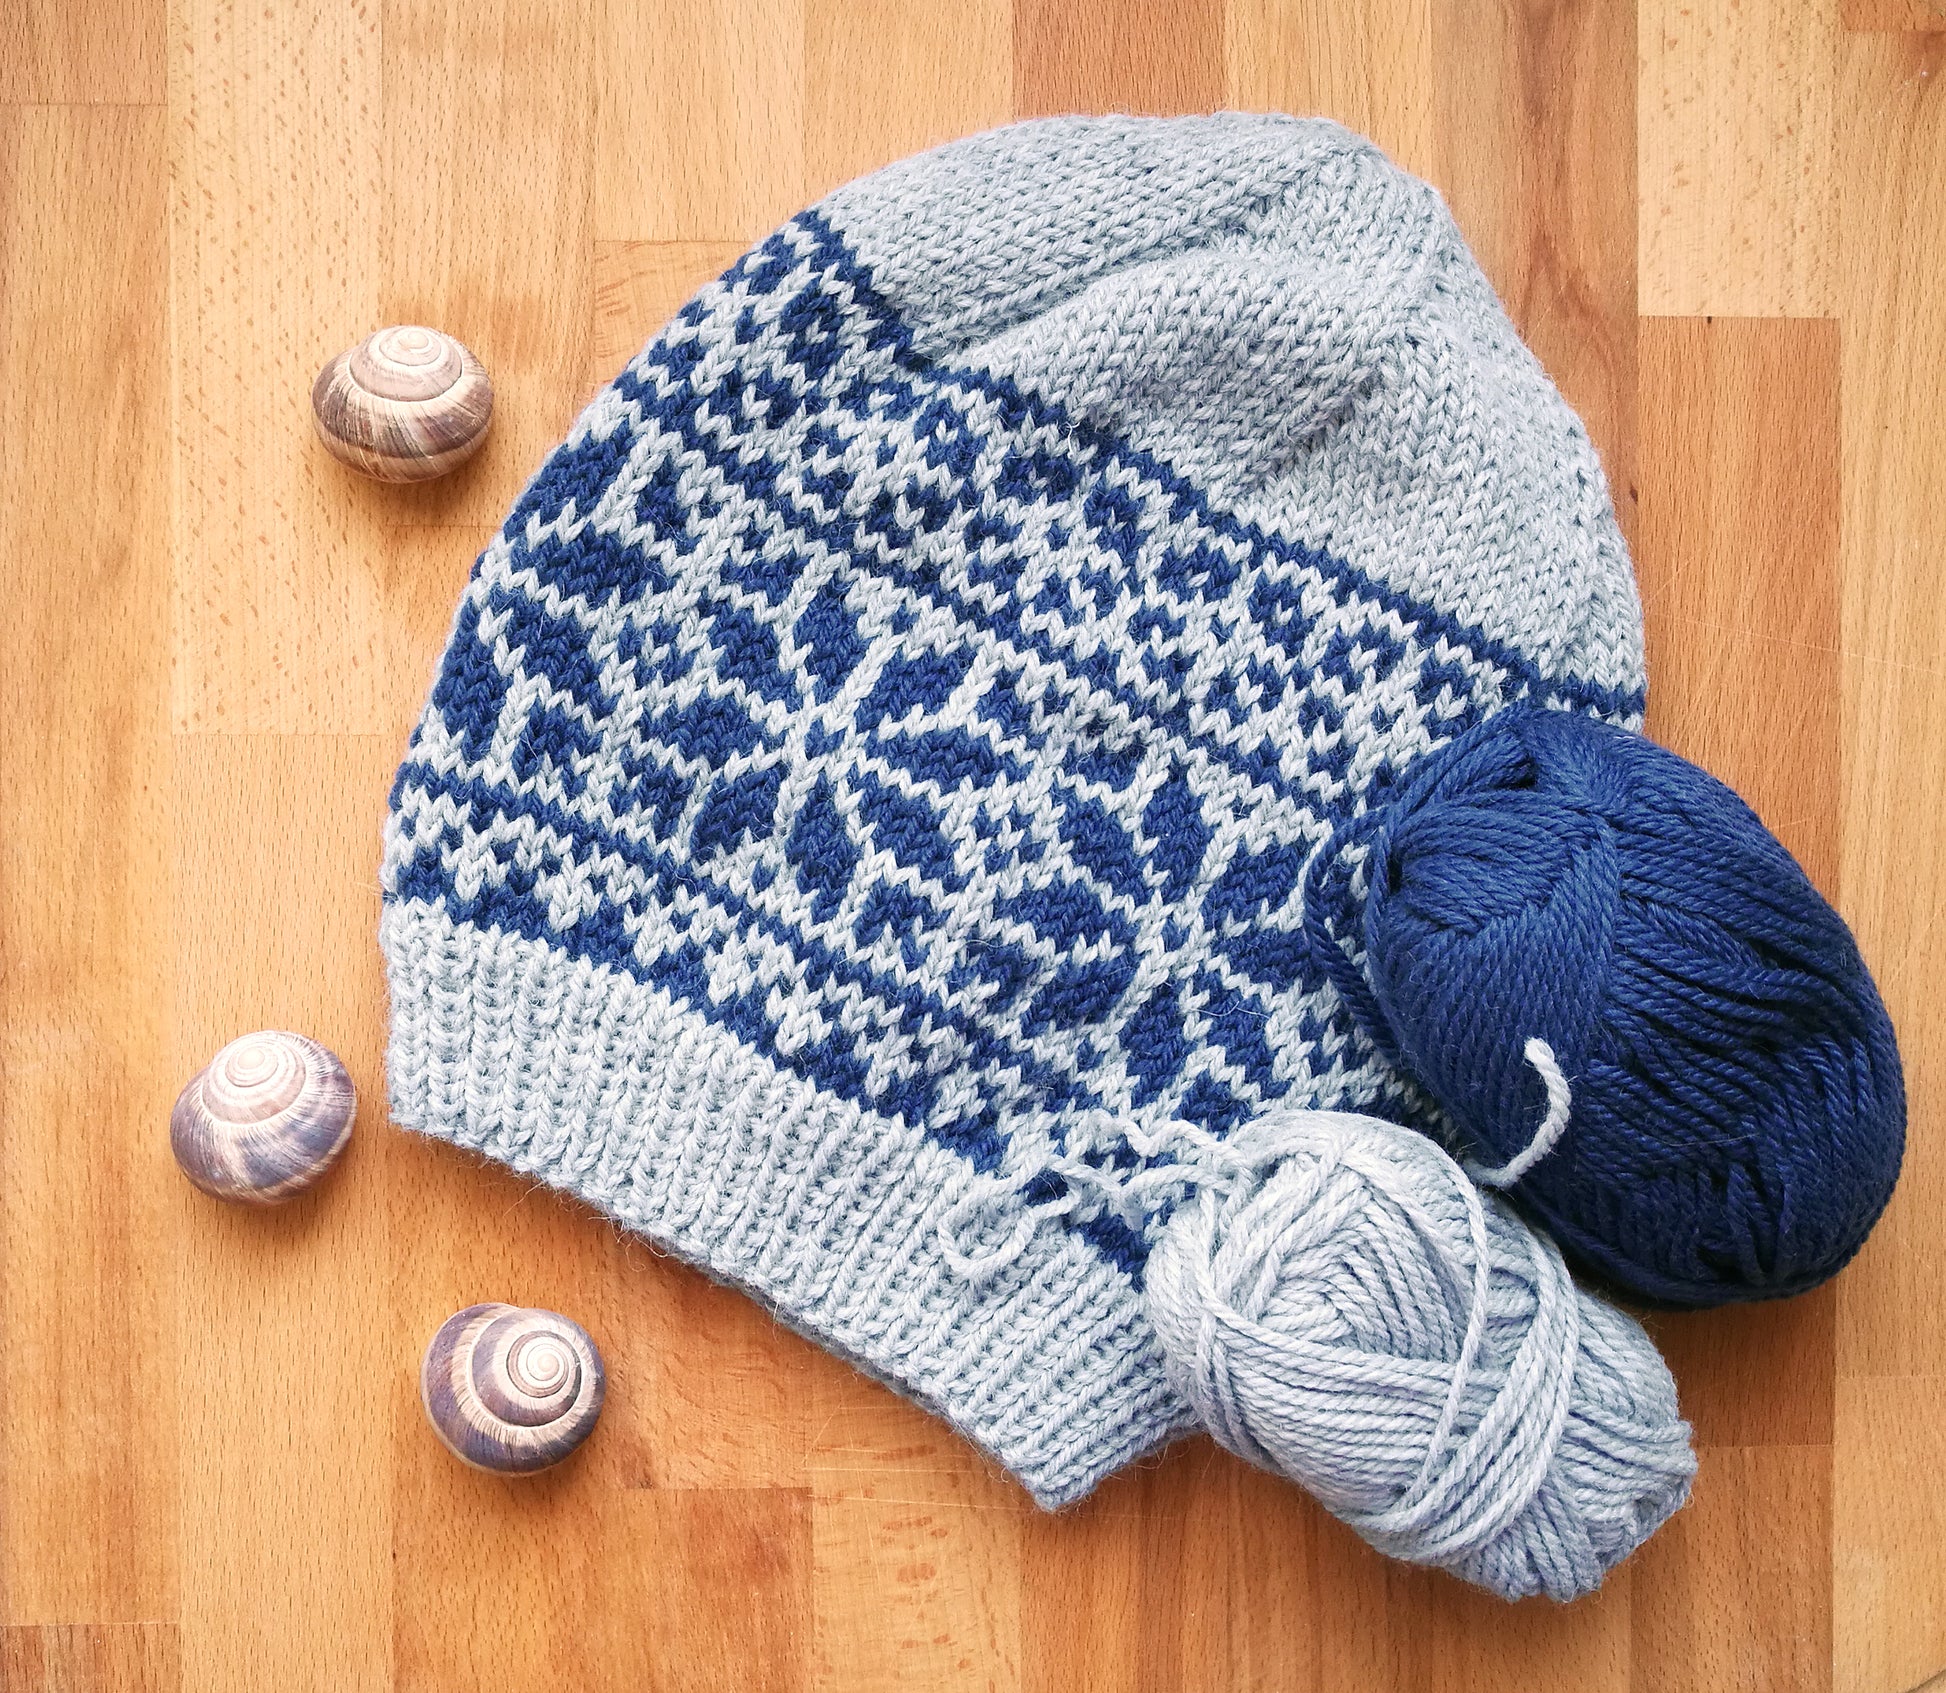 grey and blue wool hand-knitted Fair Isle beanie hat in Roses knitting pattern on a wooden background